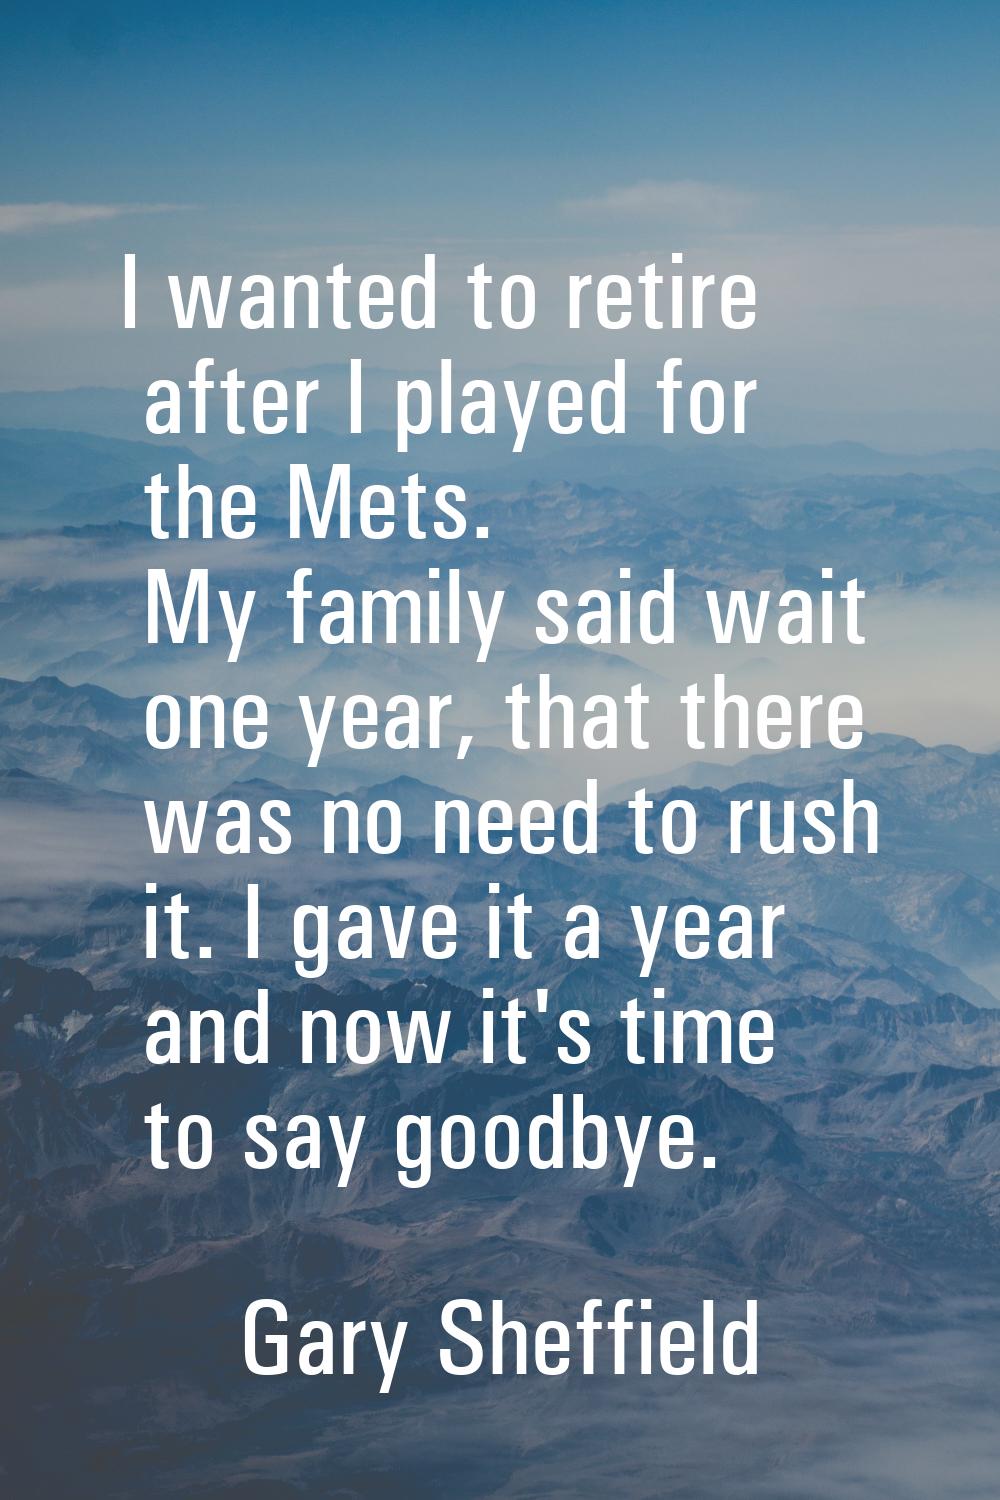 I wanted to retire after I played for the Mets. My family said wait one year, that there was no nee